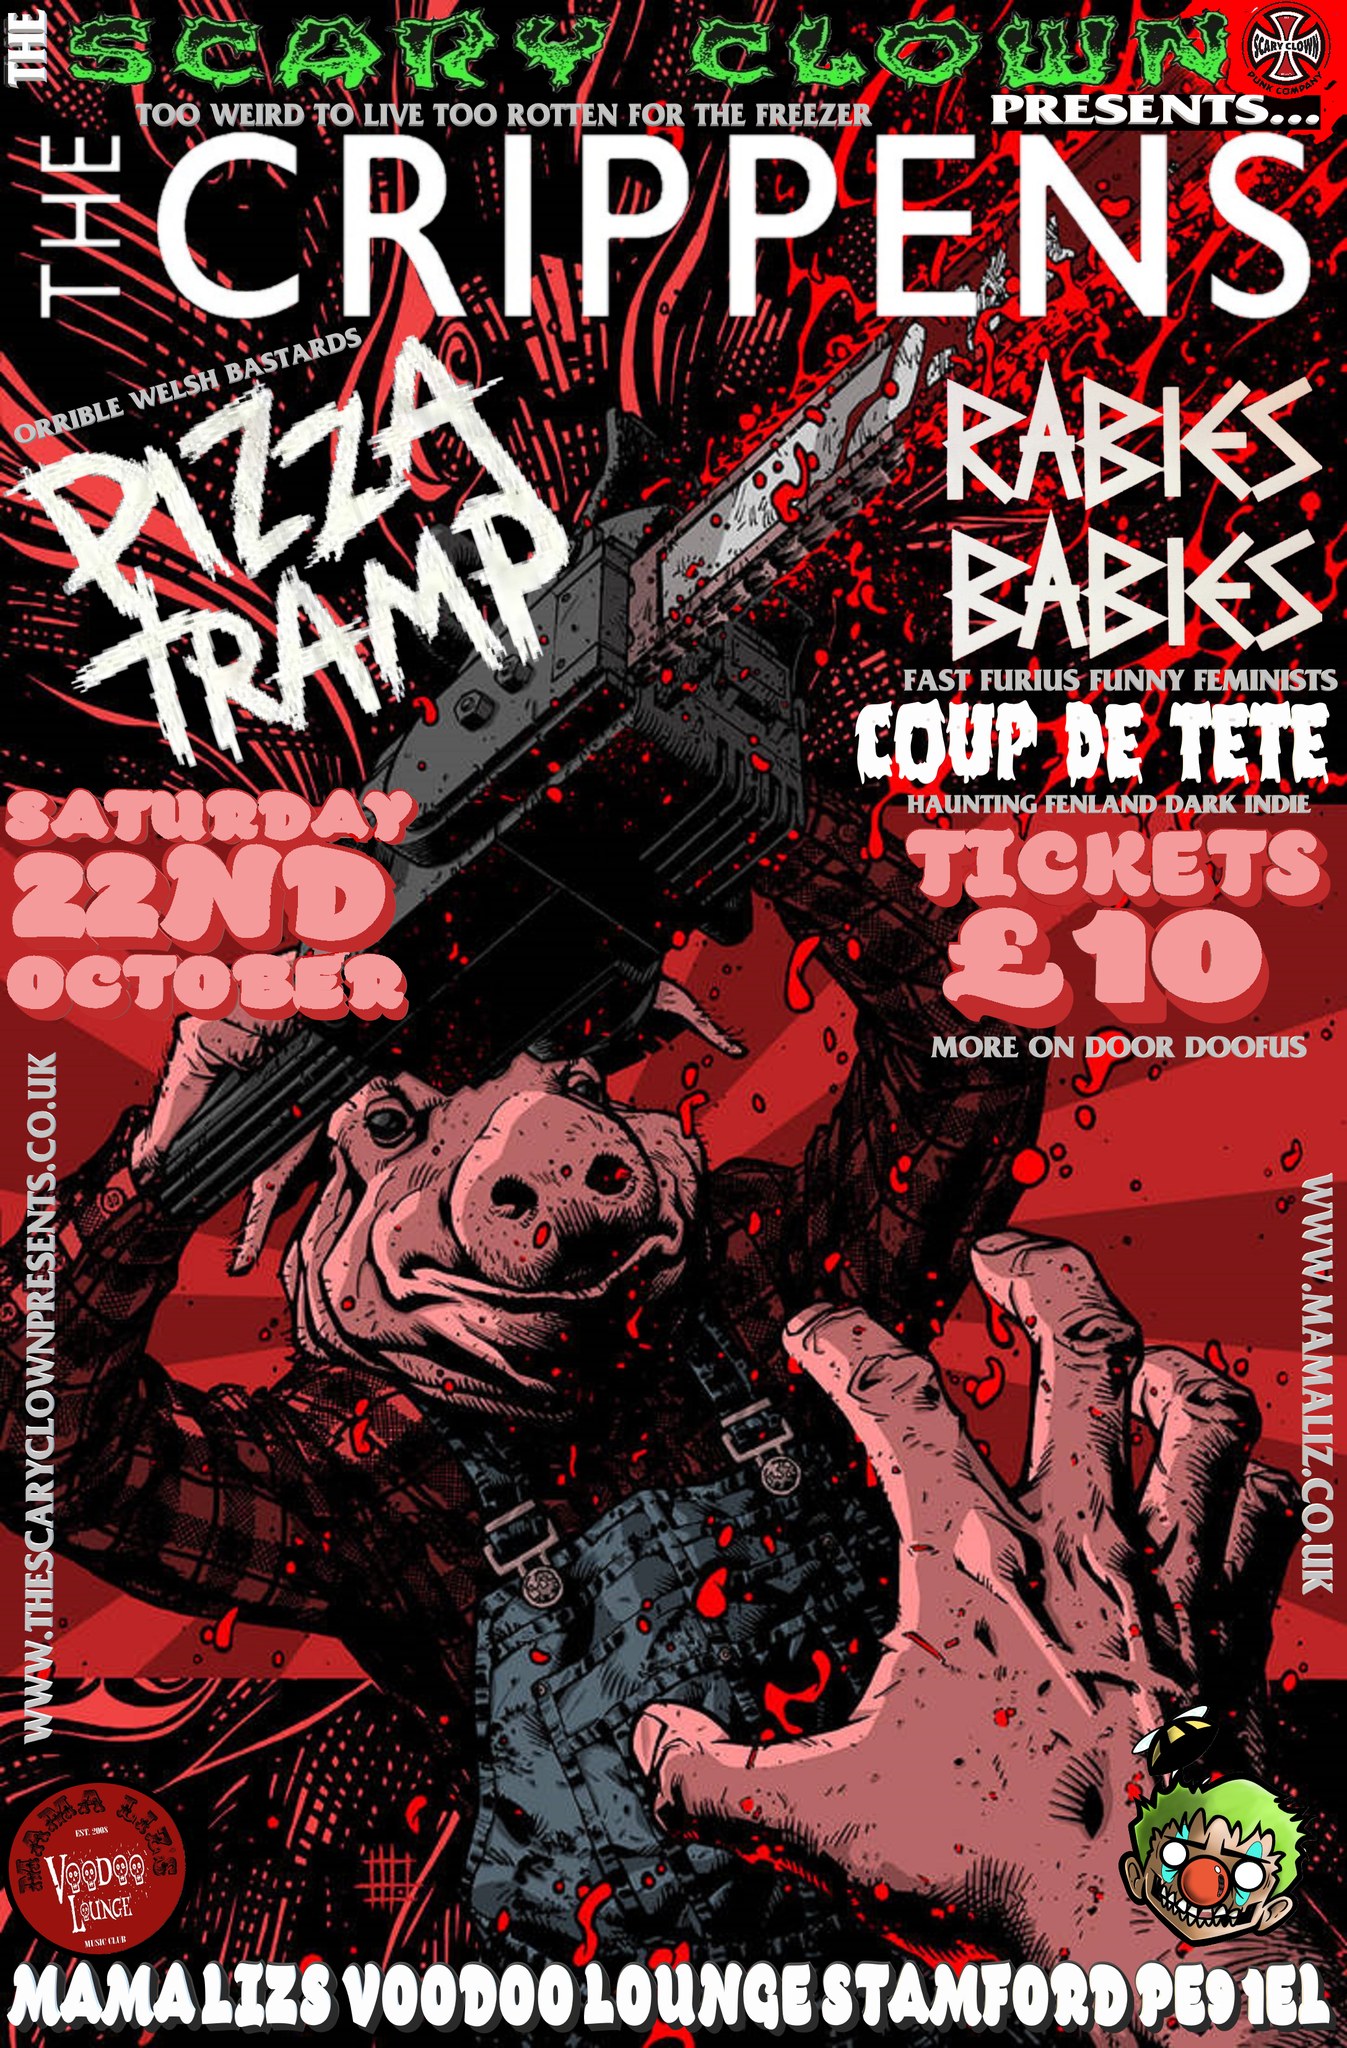 crippins and pizzatramp gig poster